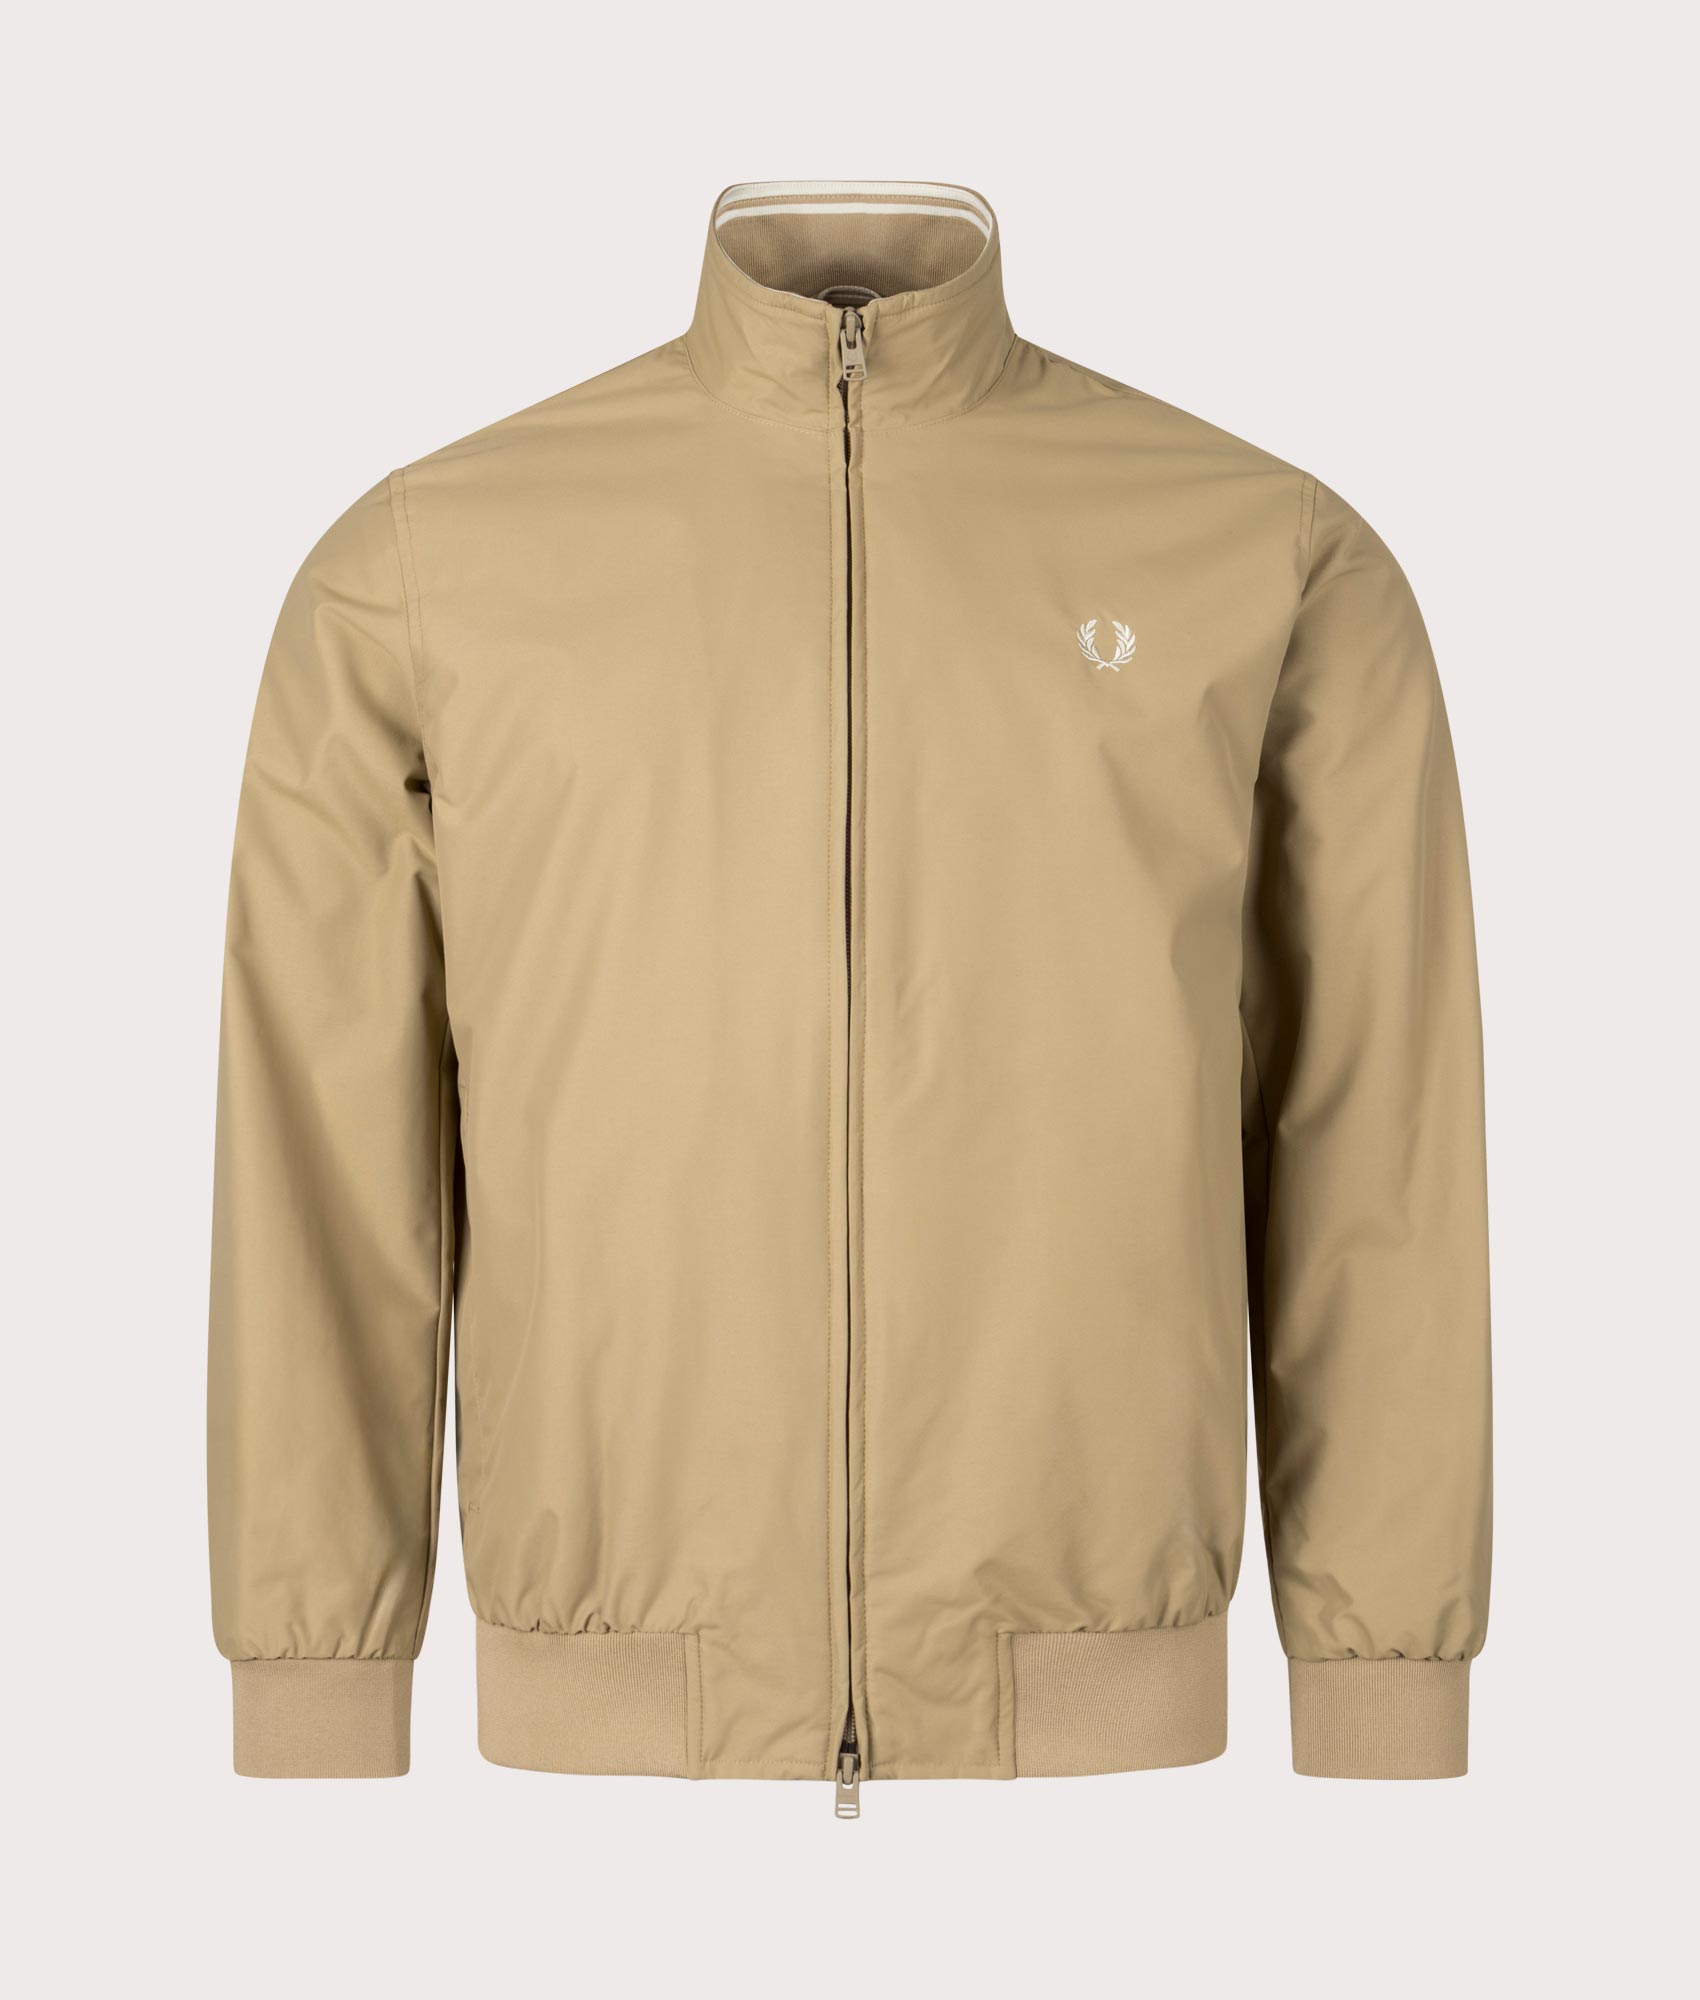 Fred Perry Mens Brentham Jacket - Colour: 363 Warm Stone - Size: Large